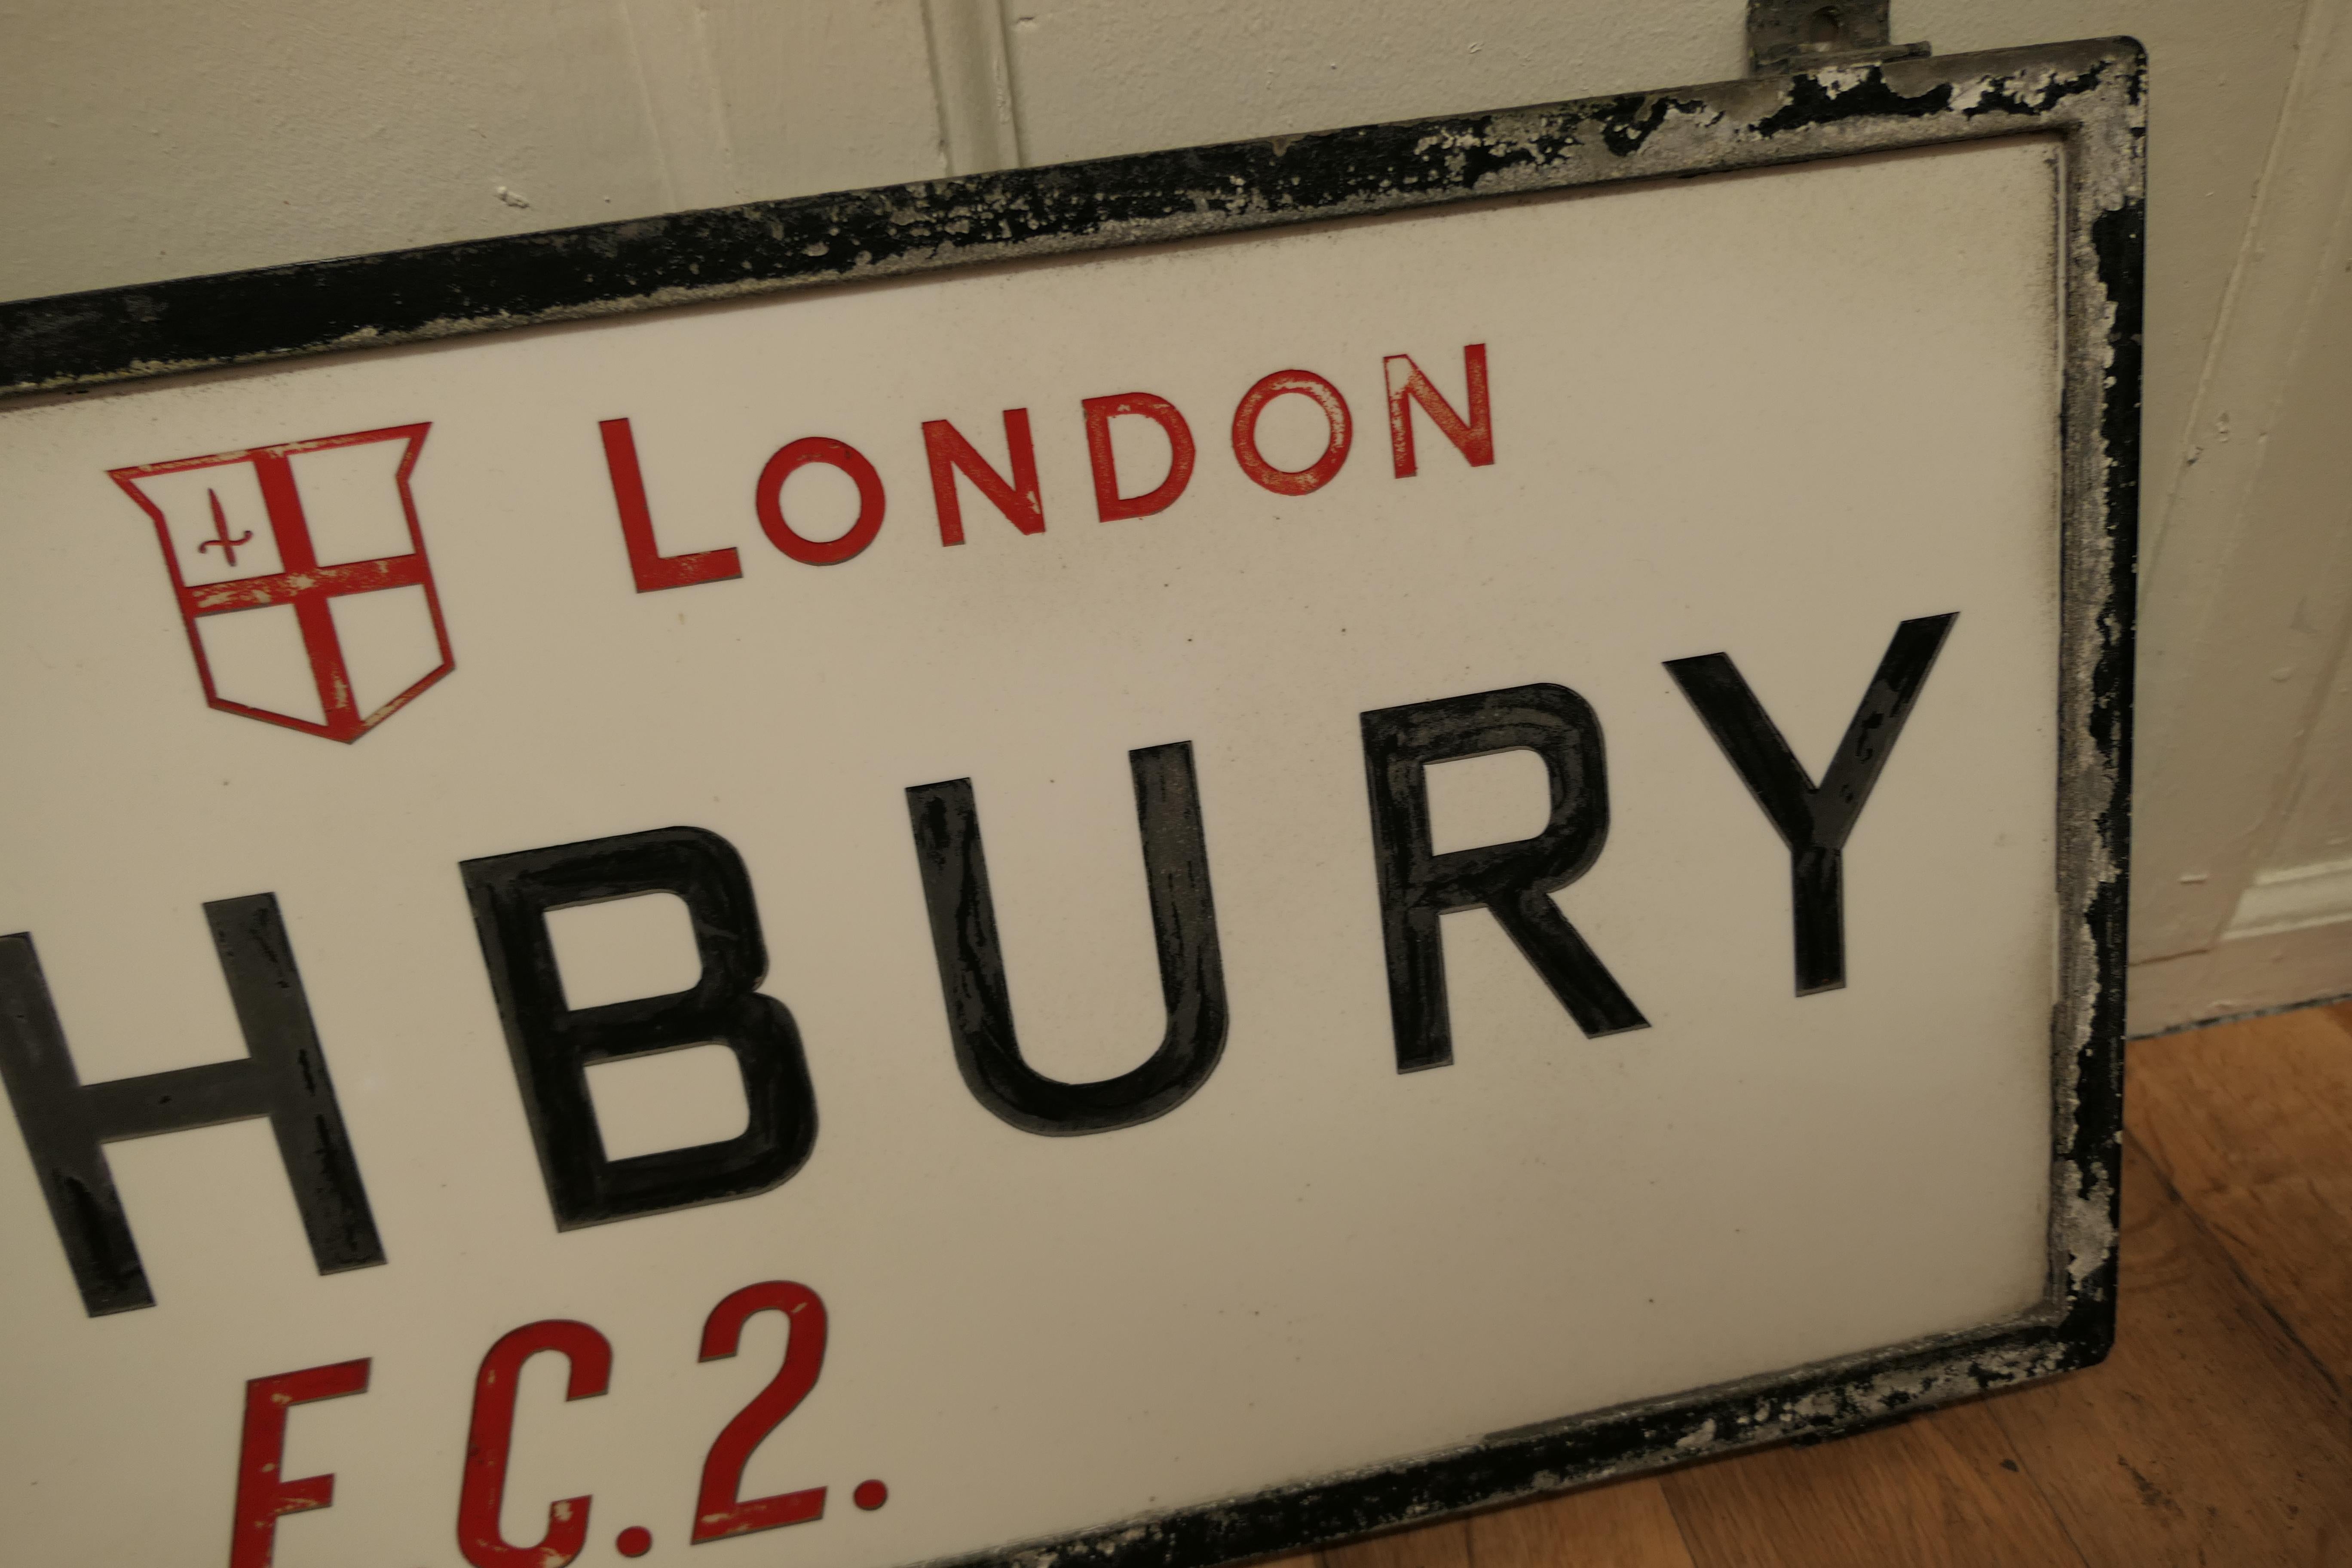 City of London Glass Edwardian Street Sign, Lothbury E.C.2 In Good Condition For Sale In Chillerton, Isle of Wight